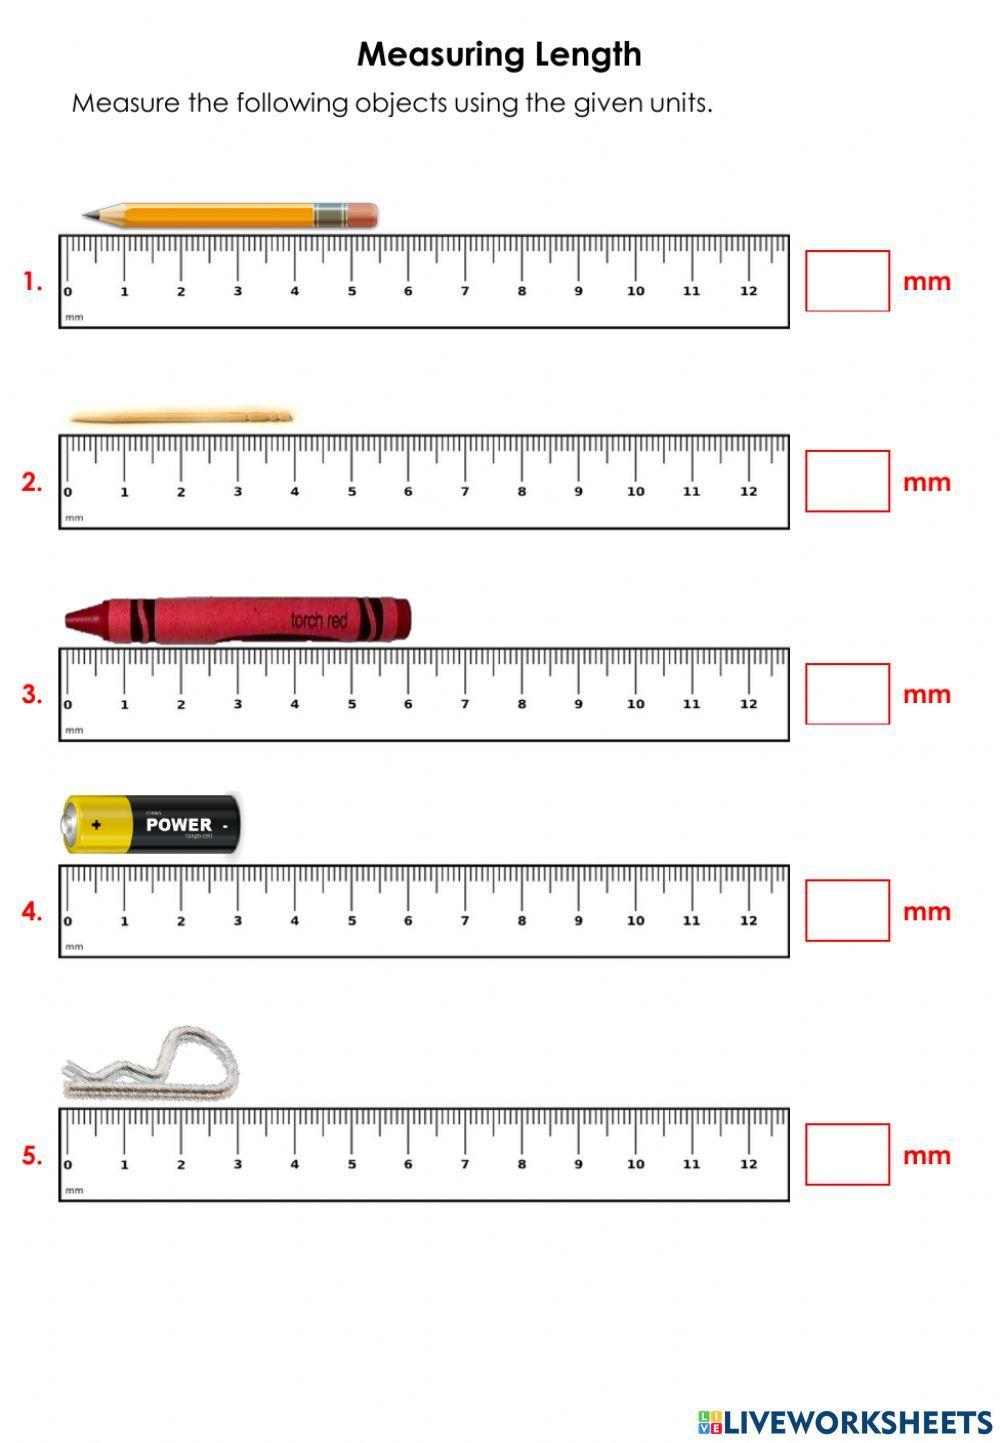 Measuring length in mm and cm